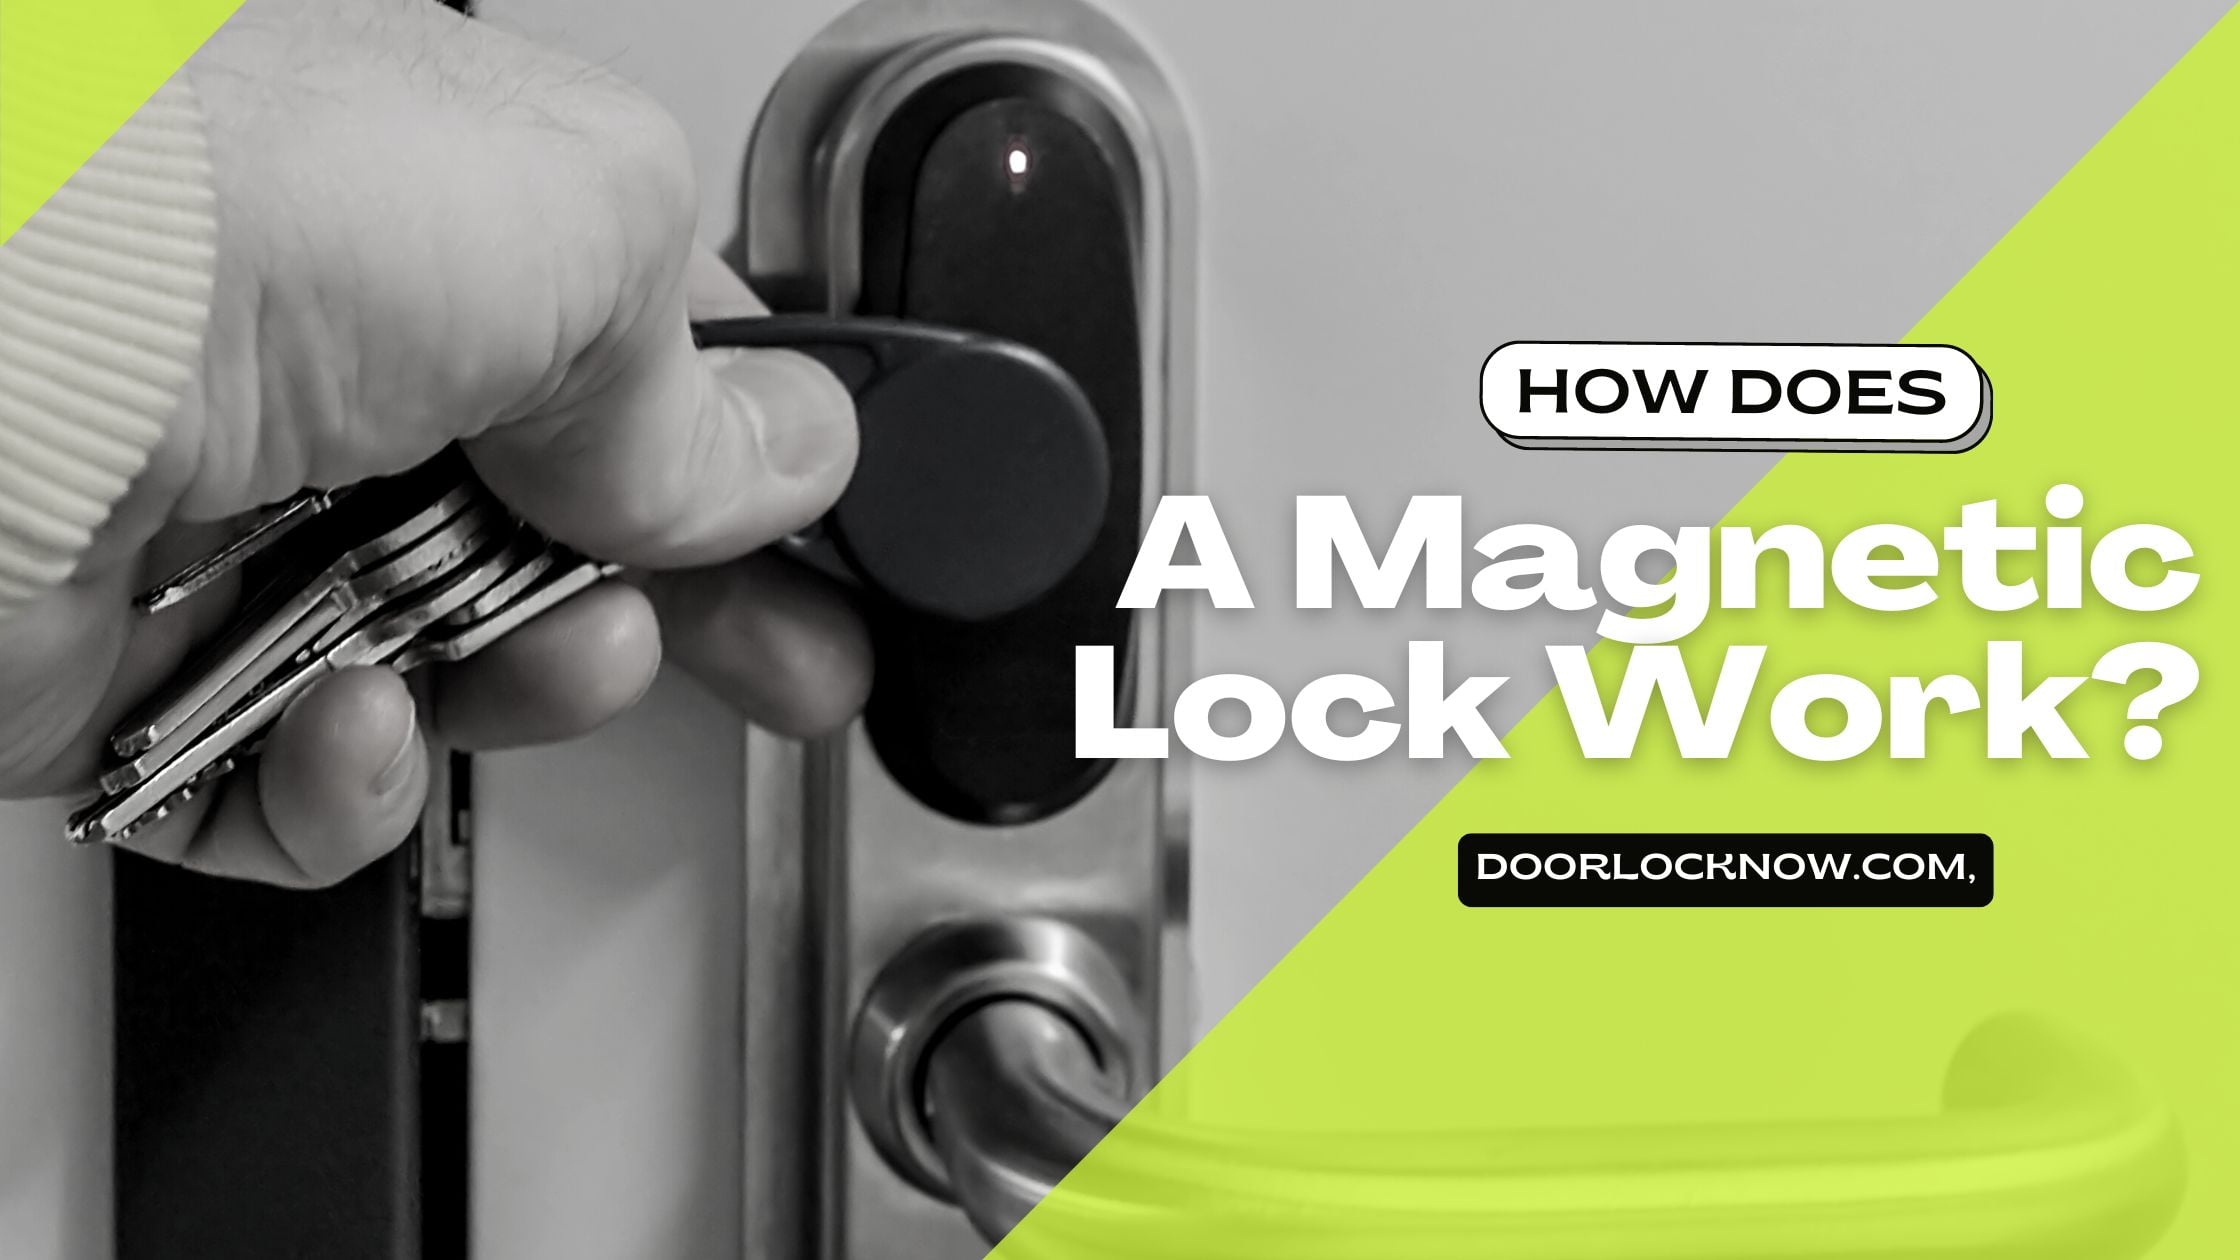 How Does a Magnetic Lock Work?